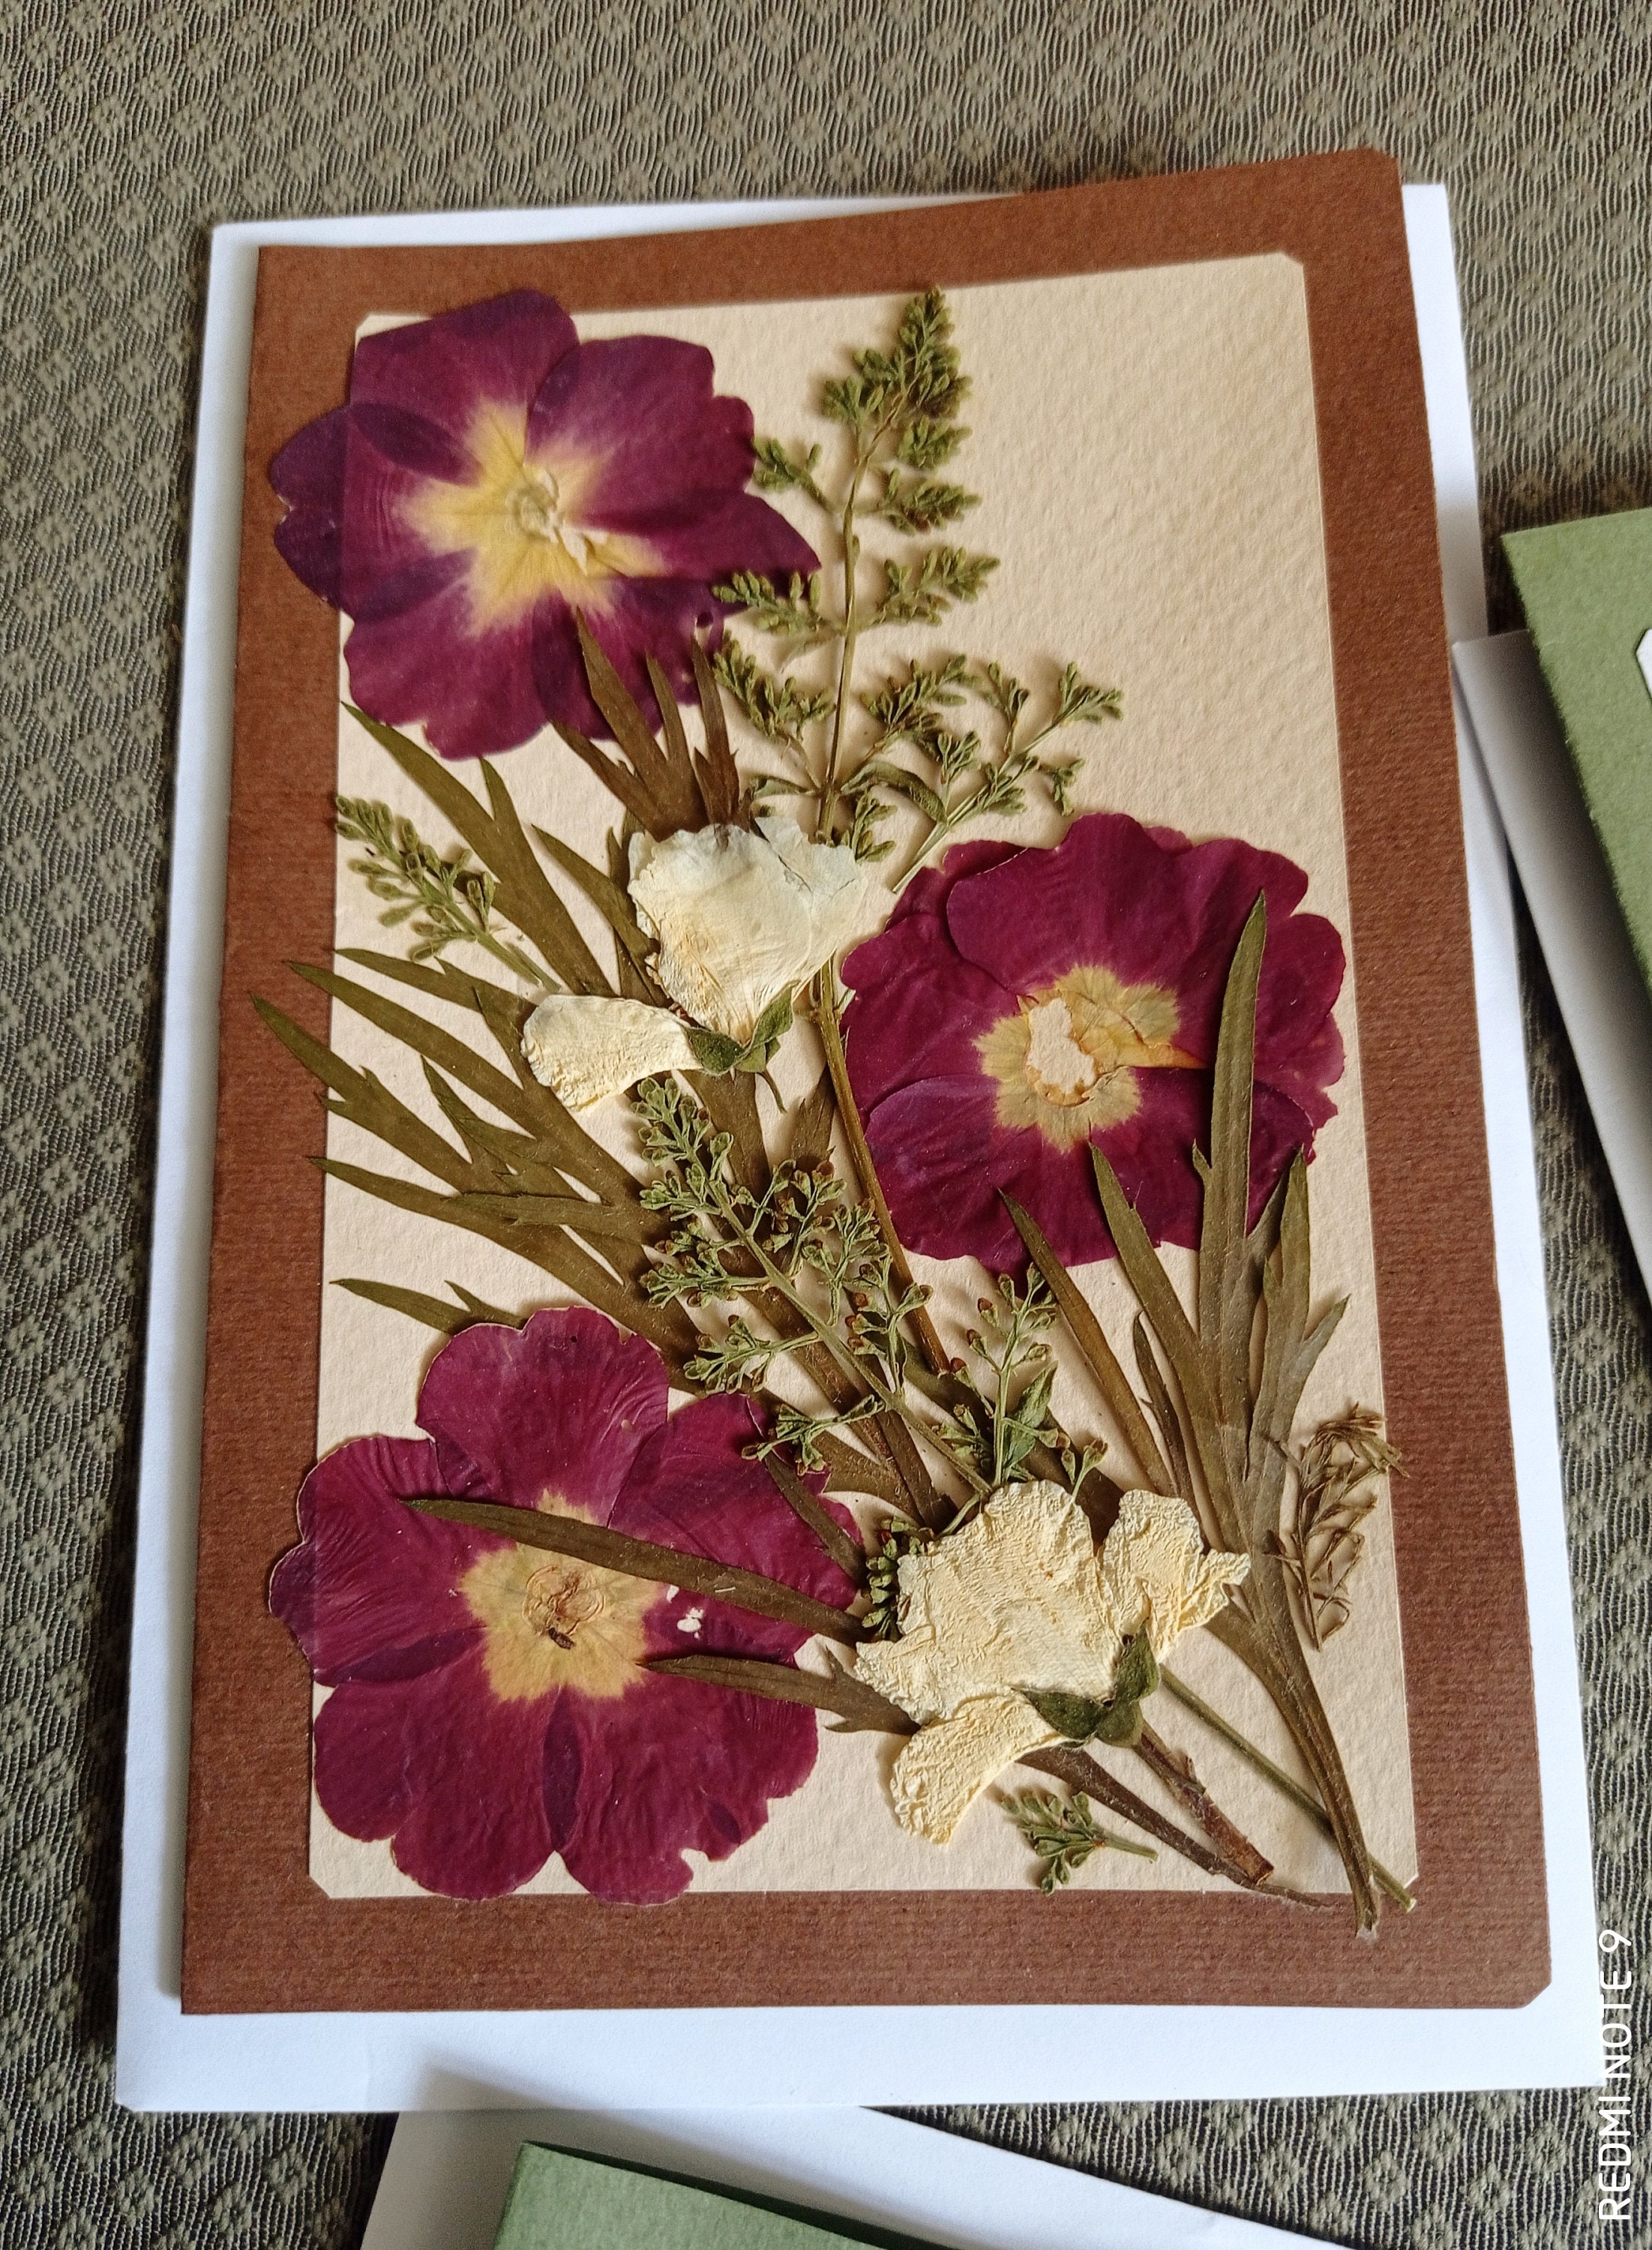 My new handmade oshibana -> Real pressed and dried flowers in frame.  Handpicked flowers, pressed and dried for weeks, arranged in one-a-kind  floral decor. Enjoy! : r/somethingimade